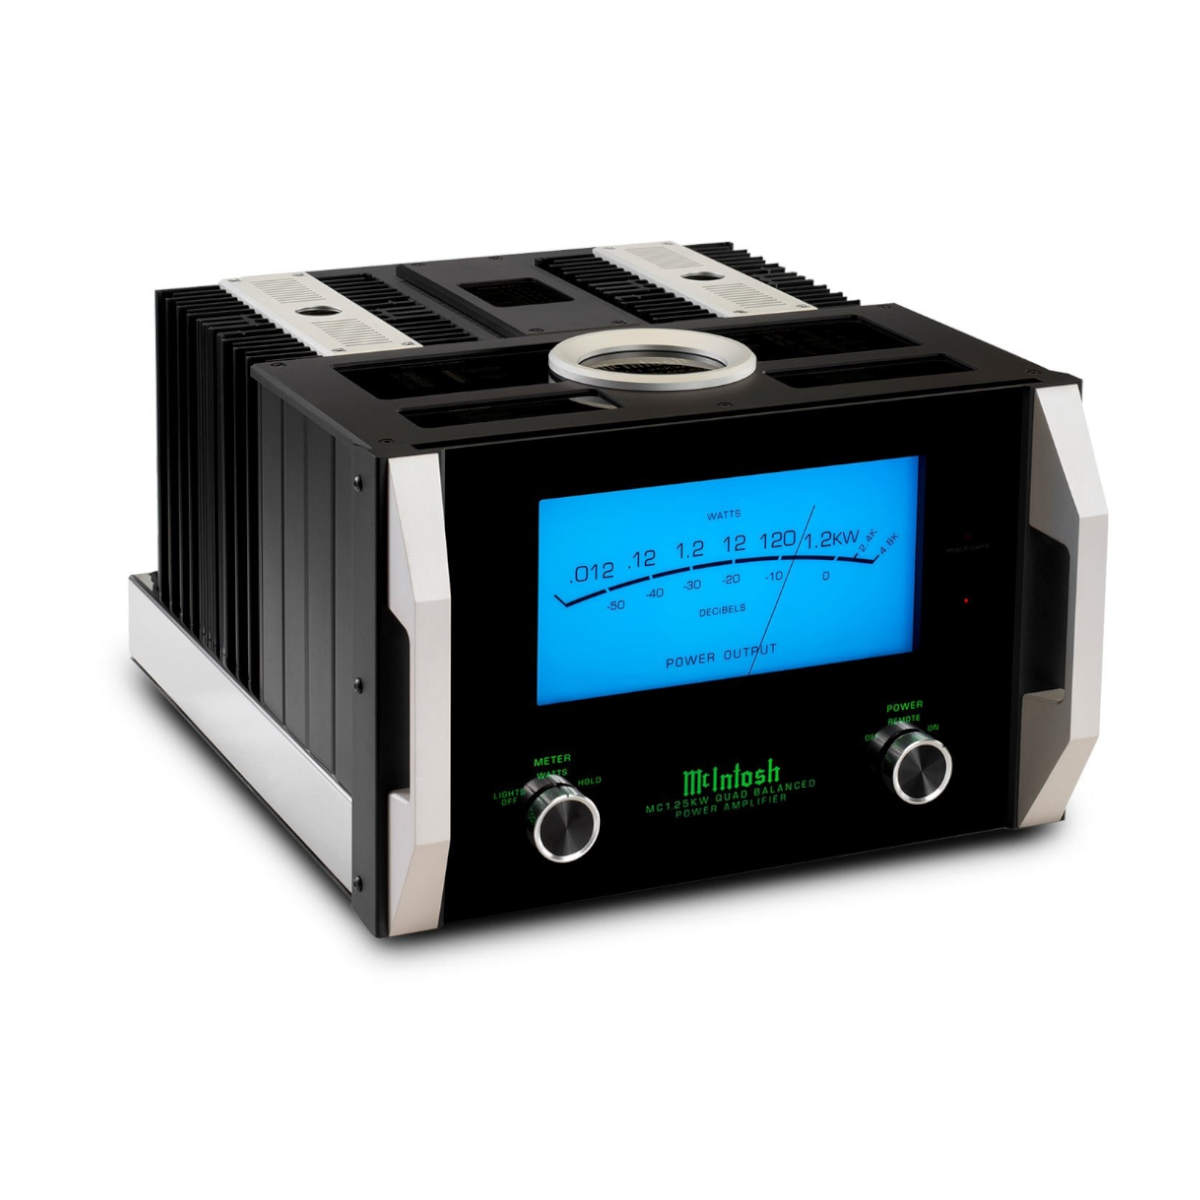 McIntosh MC1.25KW 1-Channel Solid State Amplifier - Ooberpad India